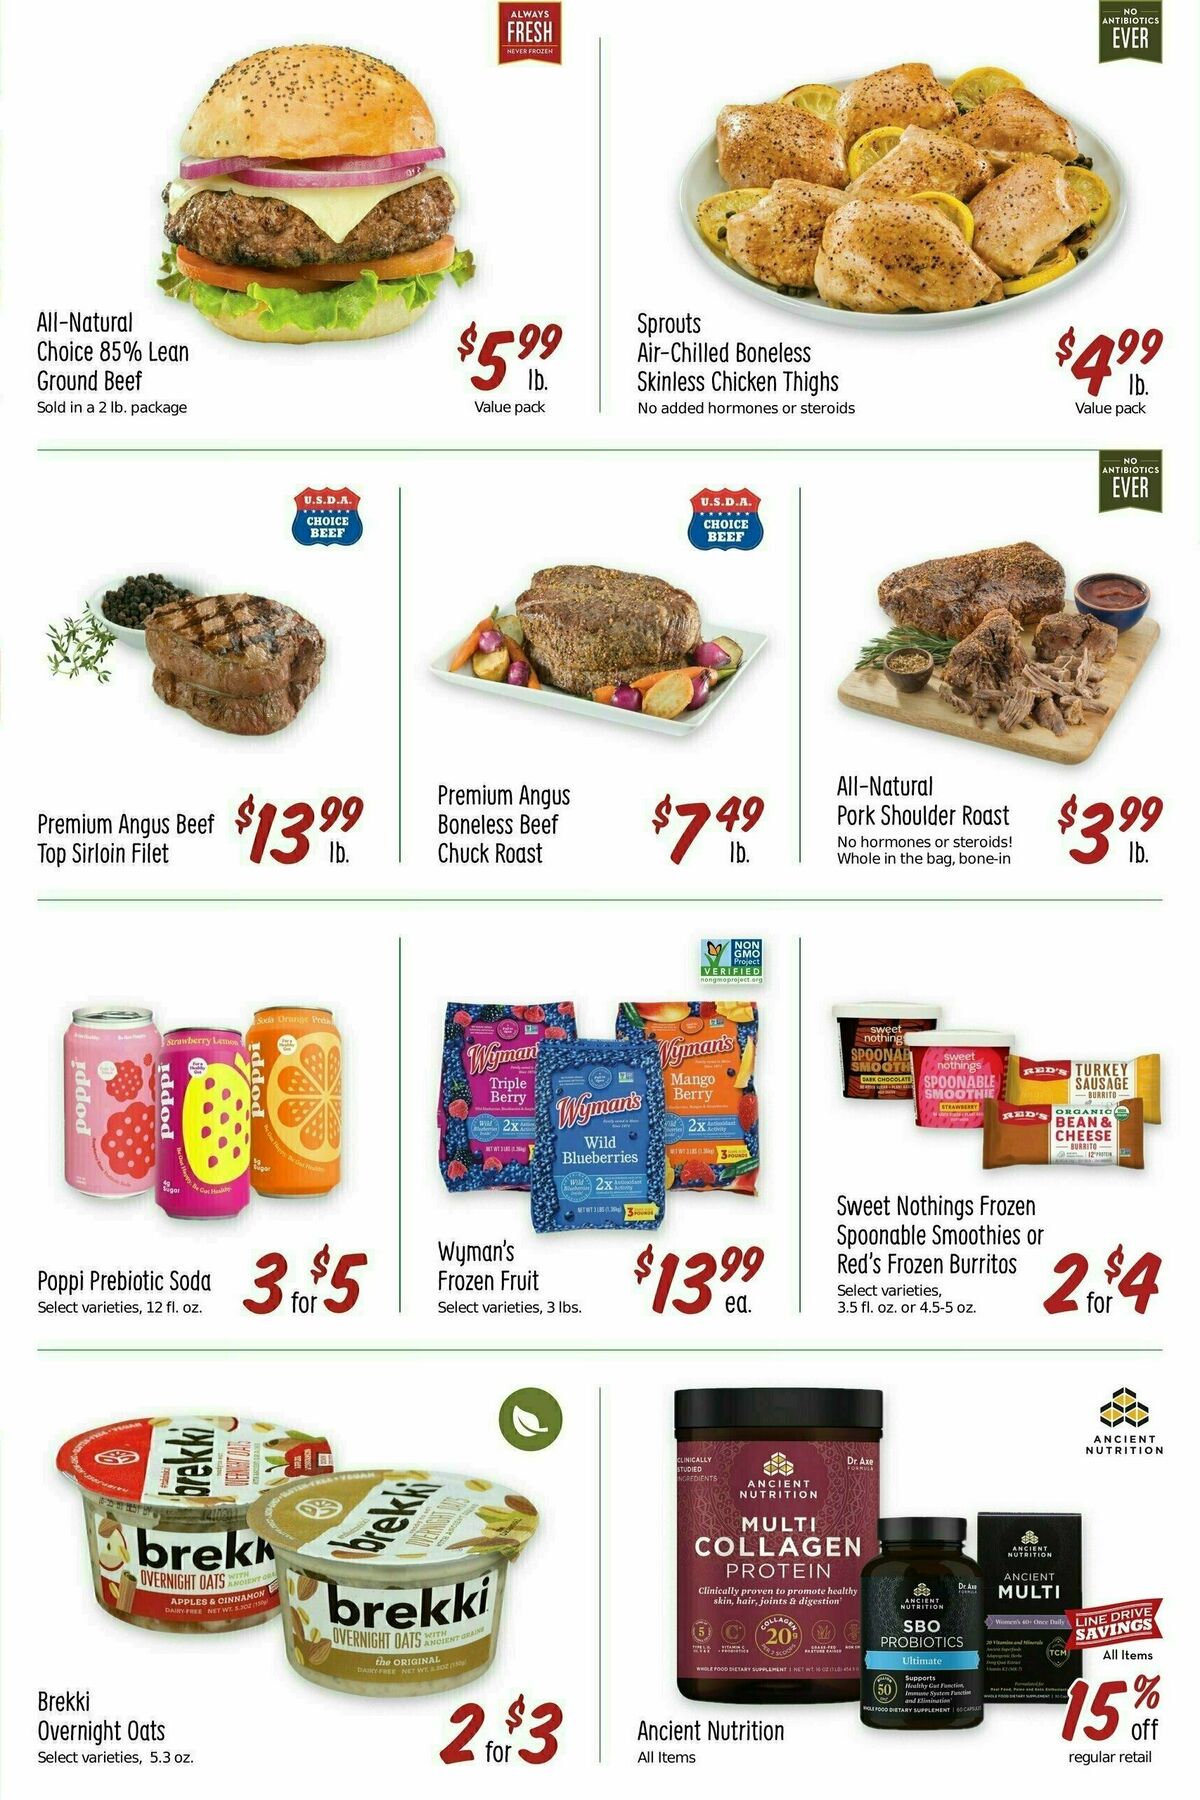 Sprouts Farmers Market Weekly Ad from September 6